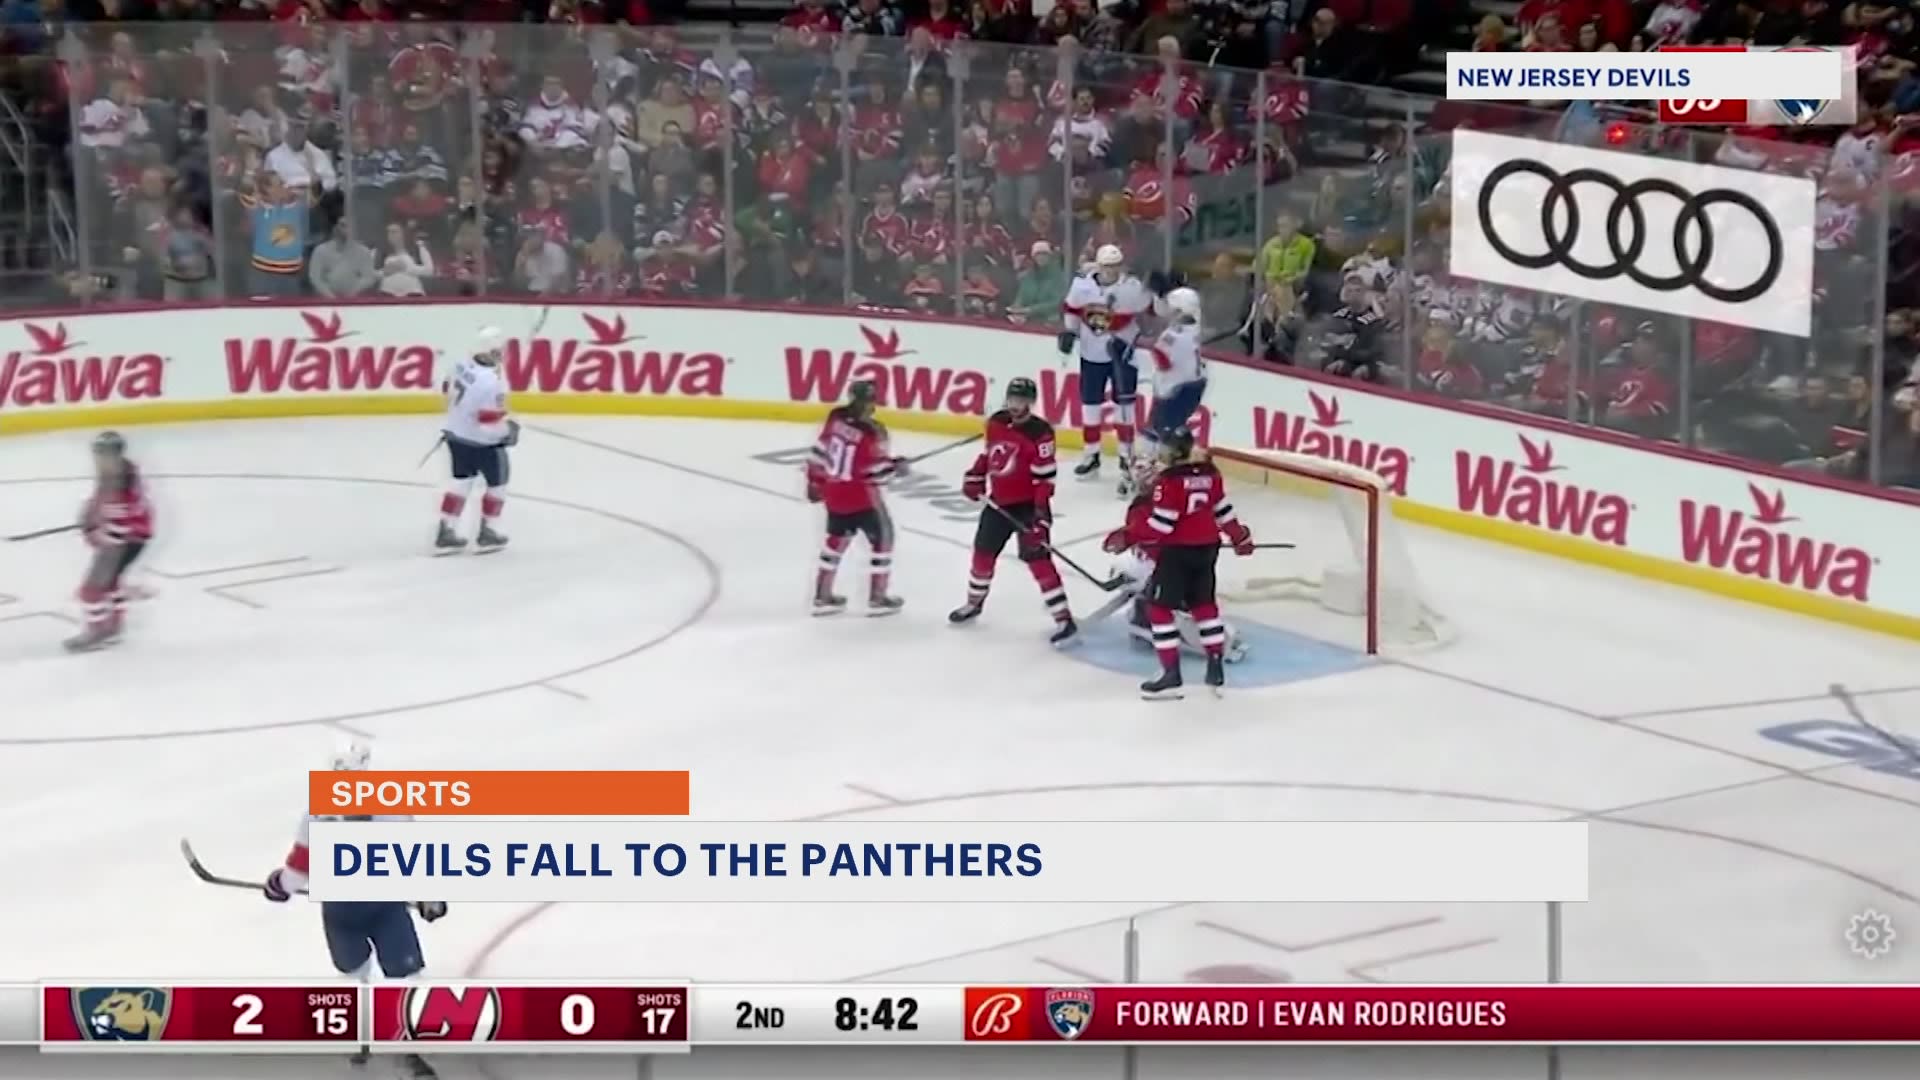 NJ Devils Bench Trio of Players During Loss to Panthers - NHL Trade Rumors  